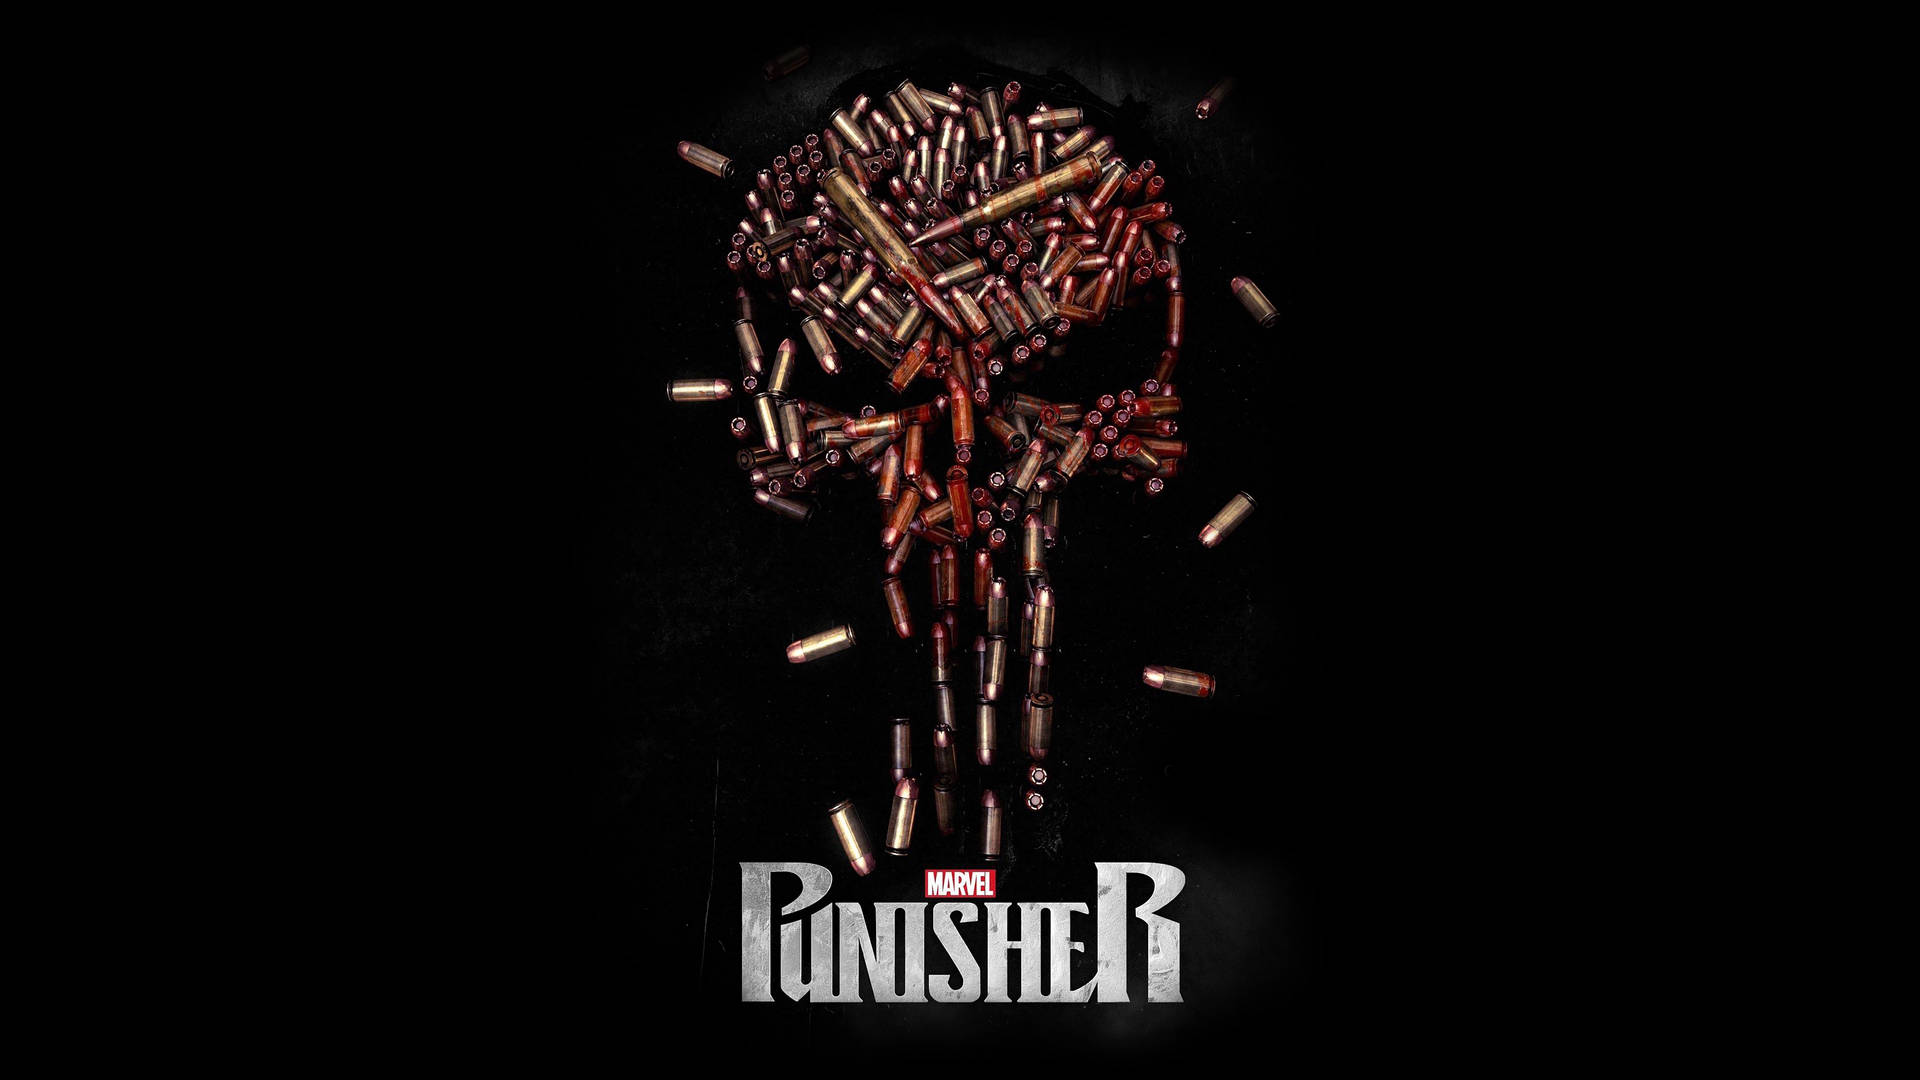 The Punisher Wallpapers 66 images